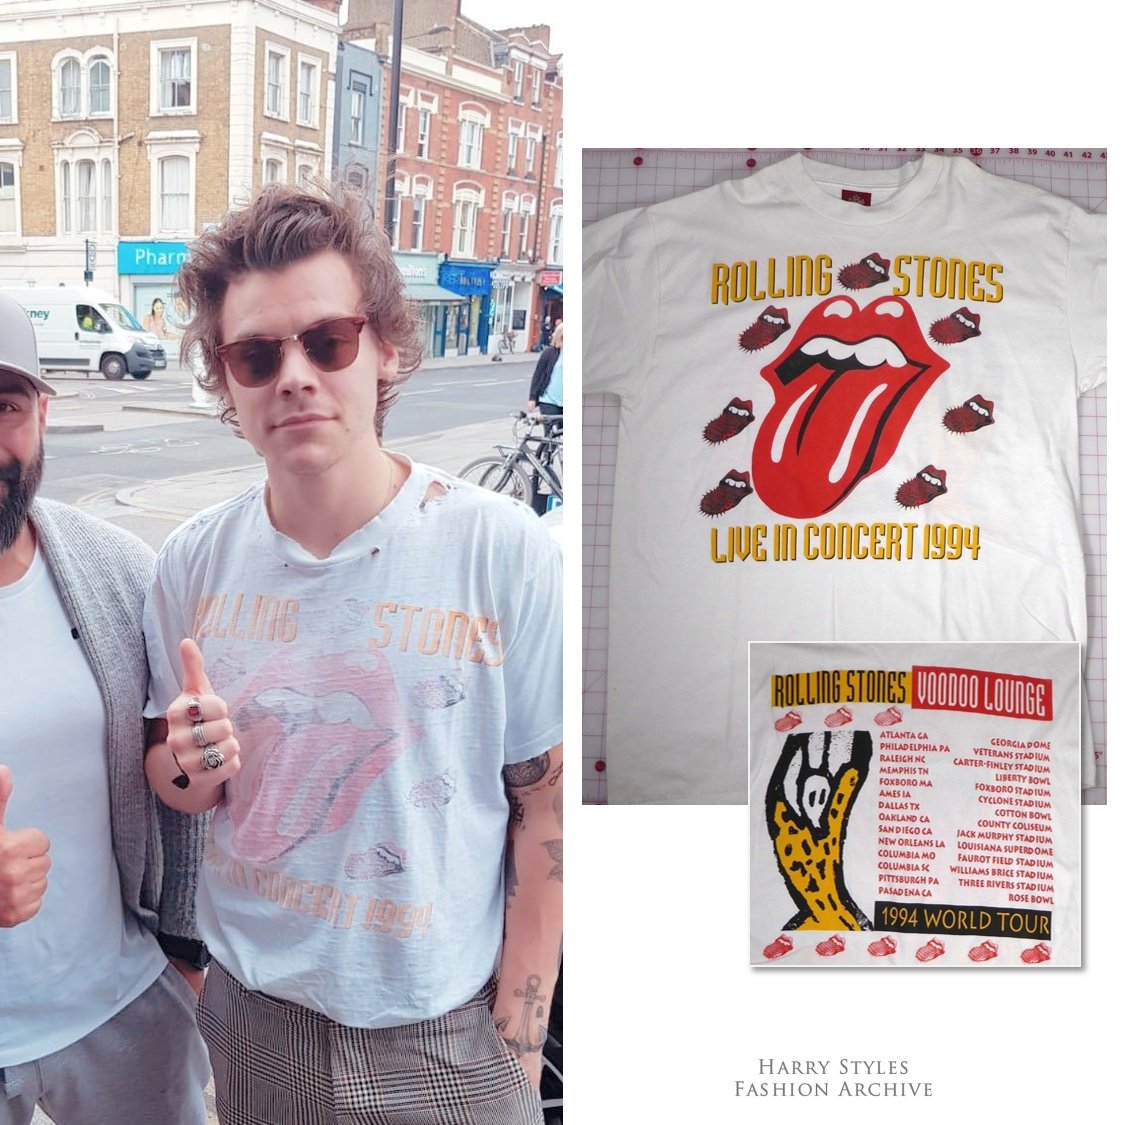 Harry Styles Fashion Archive on Twitter: "05/21/18 Harry wore a vintage Rolling Stone 1994 Voodoo Lounge World Tour t-shirt (on eBay for $199) out London. previously this shirt